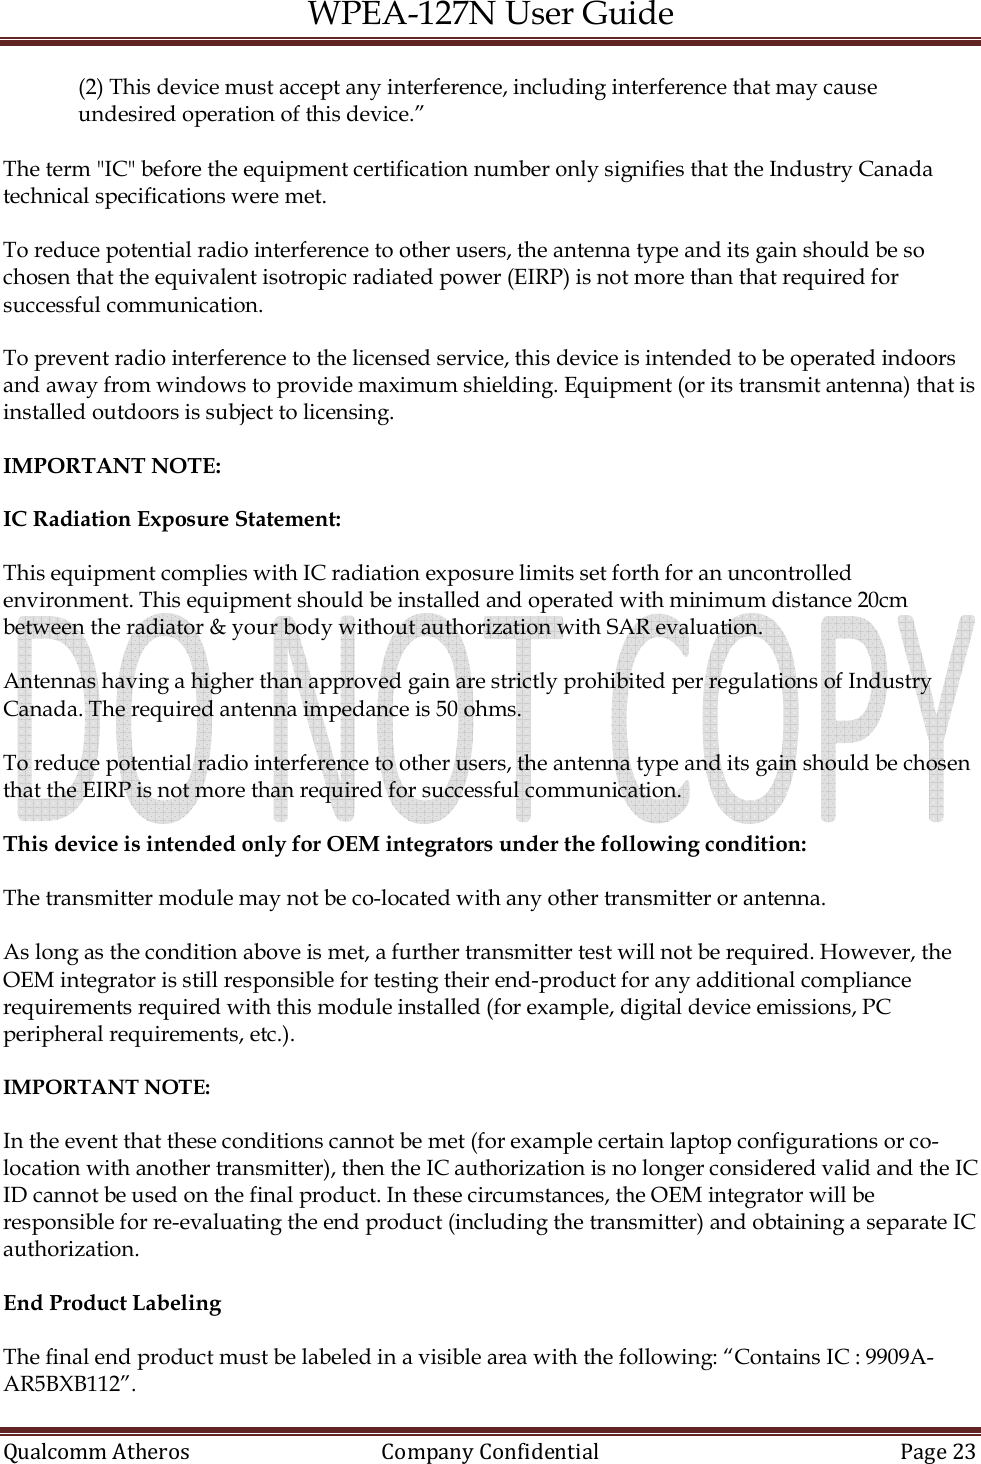 WPEA-127N User Guide  Qualcomm Atheros   Company Confidential  Page 23  (2) This device must accept any interference, including interference that may cause undesired operation of this device.”  The term &quot;IC&quot; before the equipment certification number only signifies that the Industry Canada technical specifications were met.  To reduce potential radio interference to other users, the antenna type and its gain should be so chosen that the equivalent isotropic radiated power (EIRP) is not more than that required for successful communication.  To prevent radio interference to the licensed service, this device is intended to be operated indoors and away from windows to provide maximum shielding. Equipment (or its transmit antenna) that is installed outdoors is subject to licensing.  IMPORTANT NOTE:  IC Radiation Exposure Statement:  This equipment complies with IC radiation exposure limits set forth for an uncontrolled environment. This equipment should be installed and operated with minimum distance 20cm between the radiator &amp; your body without authorization with SAR evaluation.  Antennas having a higher than approved gain are strictly prohibited per regulations of Industry Canada. The required antenna impedance is 50 ohms.  To reduce potential radio interference to other users, the antenna type and its gain should be chosen that the EIRP is not more than required for successful communication.  This device is intended only for OEM integrators under the following condition:  The transmitter module may not be co-located with any other transmitter or antenna.  As long as the condition above is met, a further transmitter test will not be required. However, the OEM integrator is still responsible for testing their end-product for any additional compliance requirements required with this module installed (for example, digital device emissions, PC peripheral requirements, etc.).  IMPORTANT NOTE:  In the event that these conditions cannot be met (for example certain laptop configurations or co-location with another transmitter), then the IC authorization is no longer considered valid and the IC ID cannot be used on the final product. In these circumstances, the OEM integrator will be responsible for re-evaluating the end product (including the transmitter) and obtaining a separate IC authorization.  End Product Labeling  The final end product must be labeled in a visible area with the following: “Contains IC : 9909A-AR5BXB112”. 